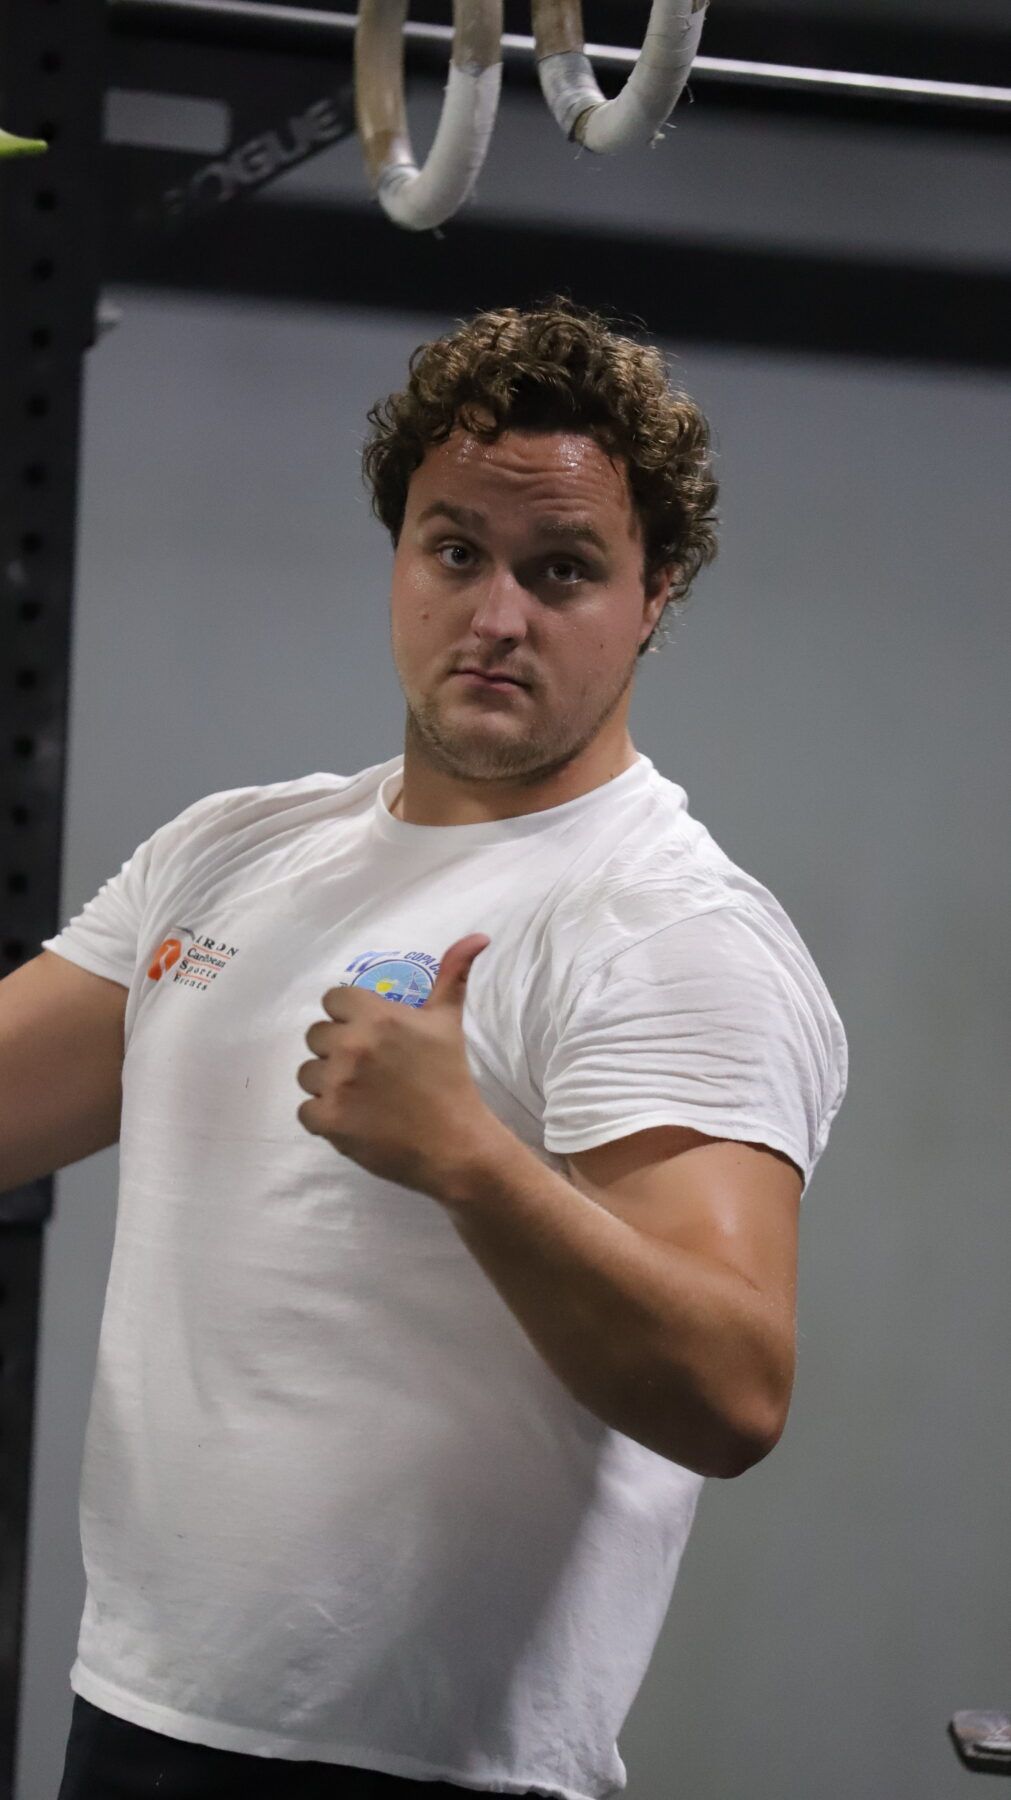 A man in a white shirt is giving a thumbs up at CrossFit Vertex gym in Scranton, PA